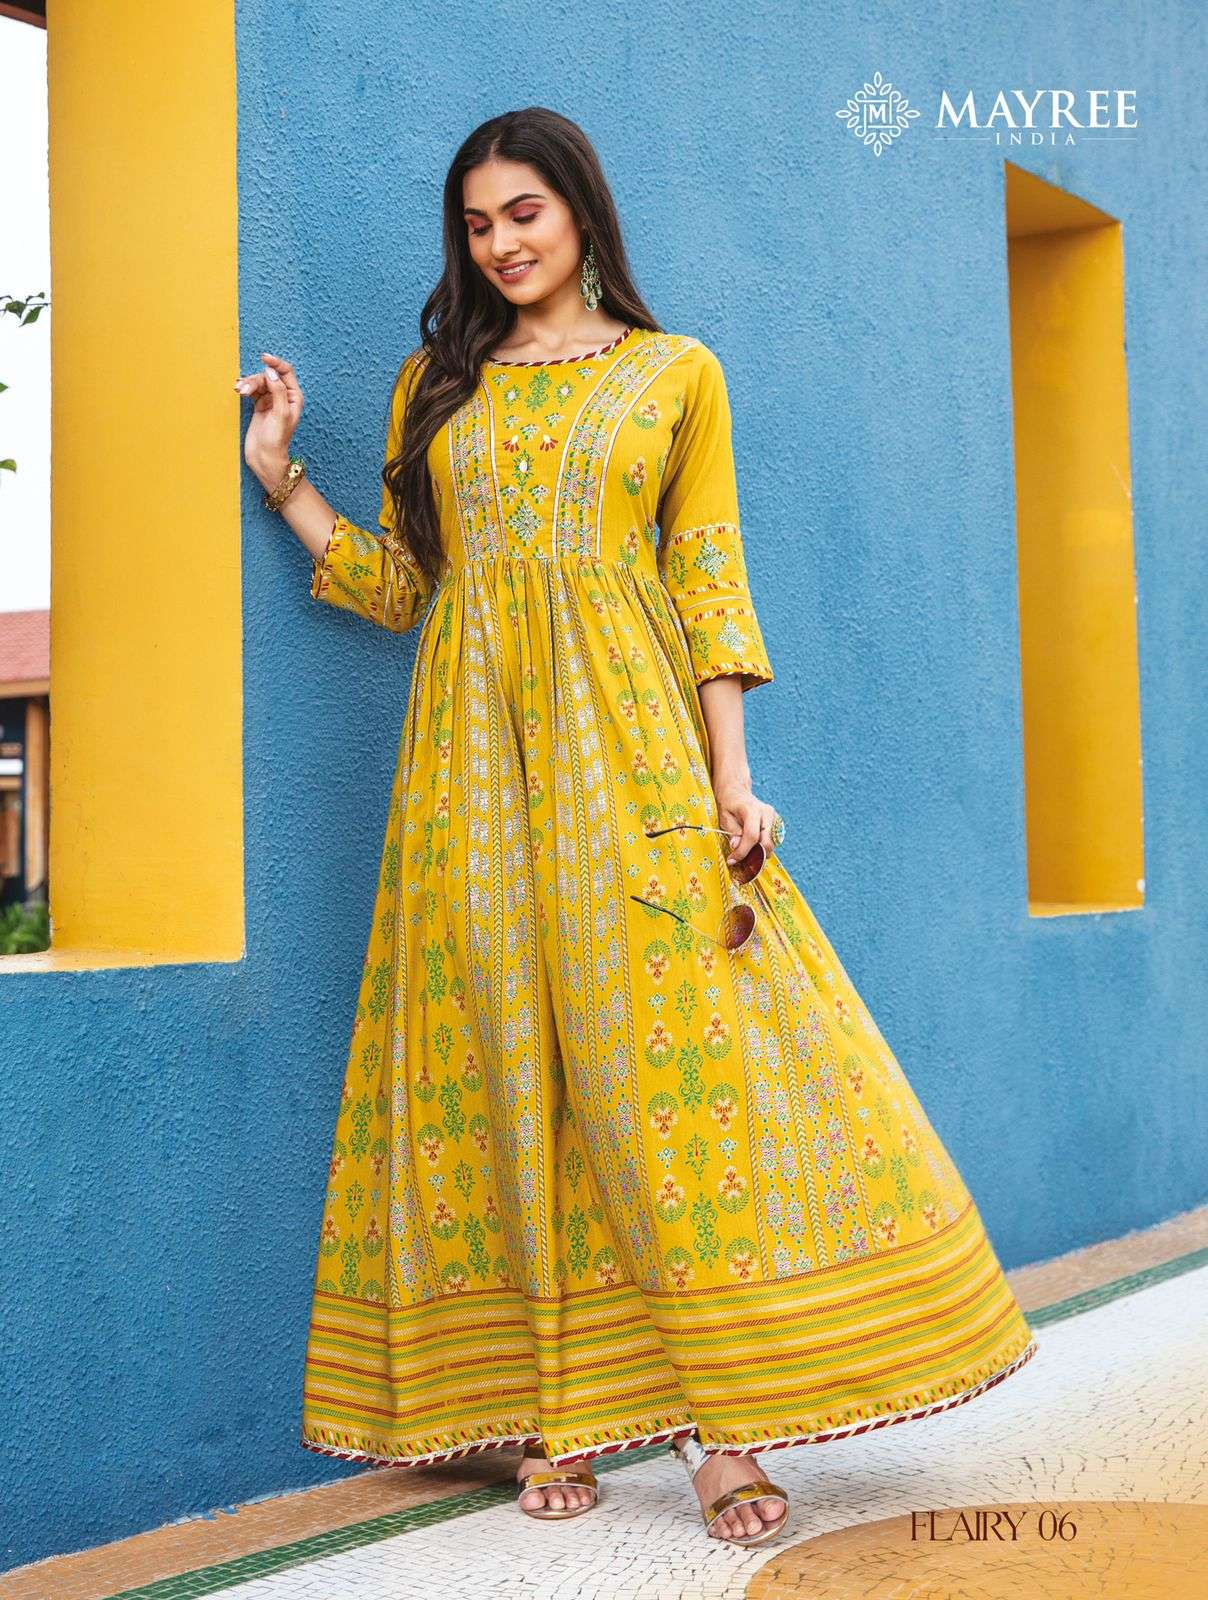 mayree india flairy silk gold printed long gown supplier